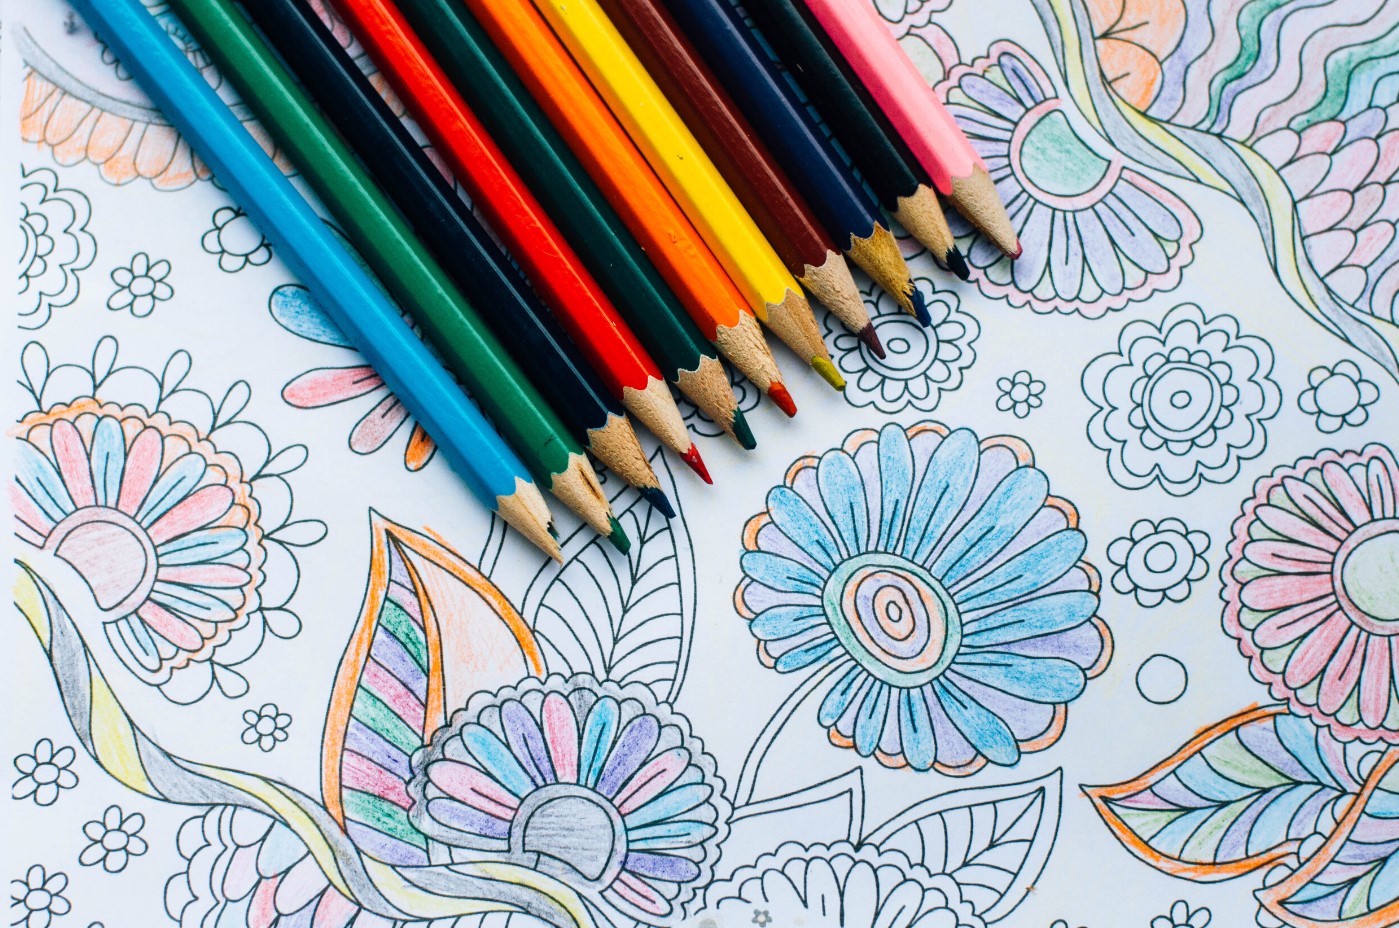 National Coloring Book Day